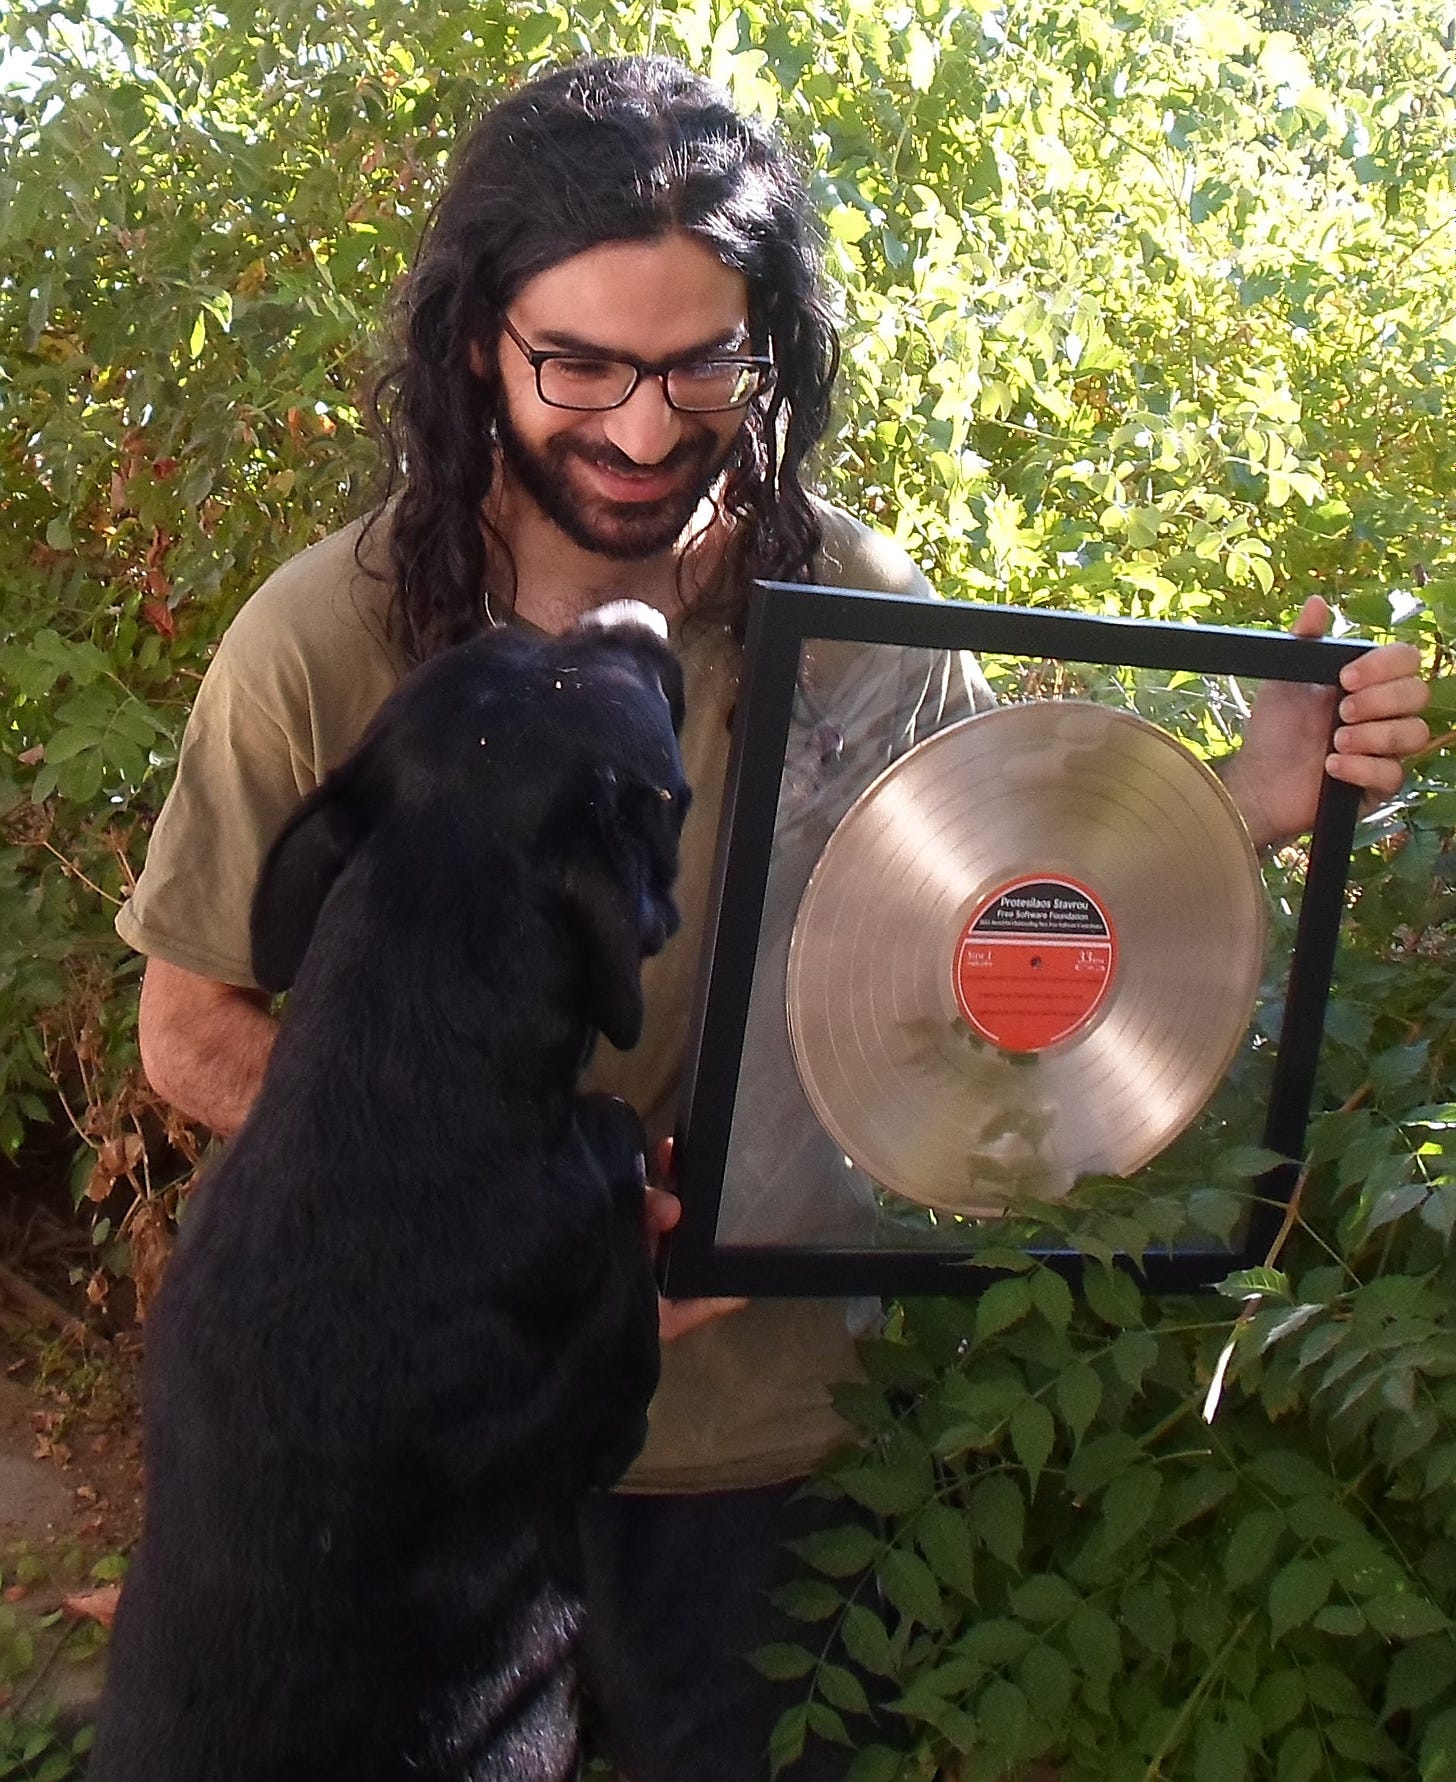 Prot with his dog and an award.